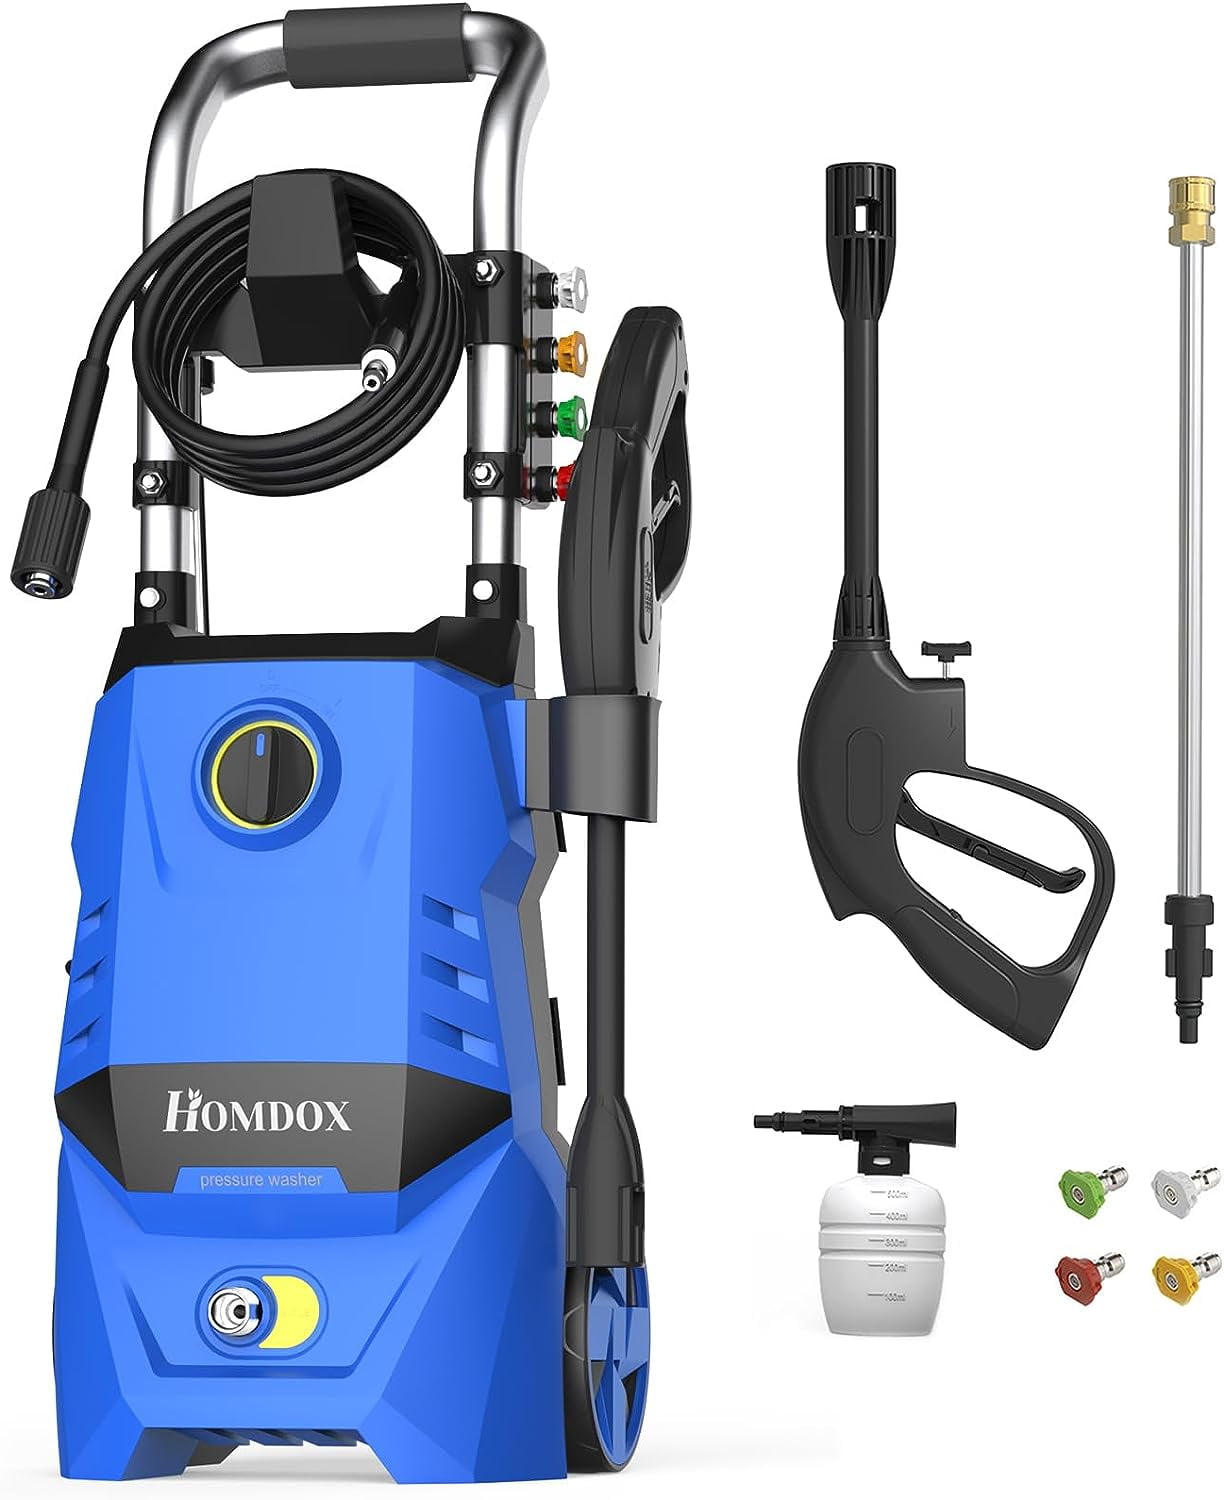 Fazil 4000PSI Pressure Washer, Electric Power Washer, Car Wash Machine with  5 Spray Nozzle,&Foam Cannon, High Powerful Cleaner for